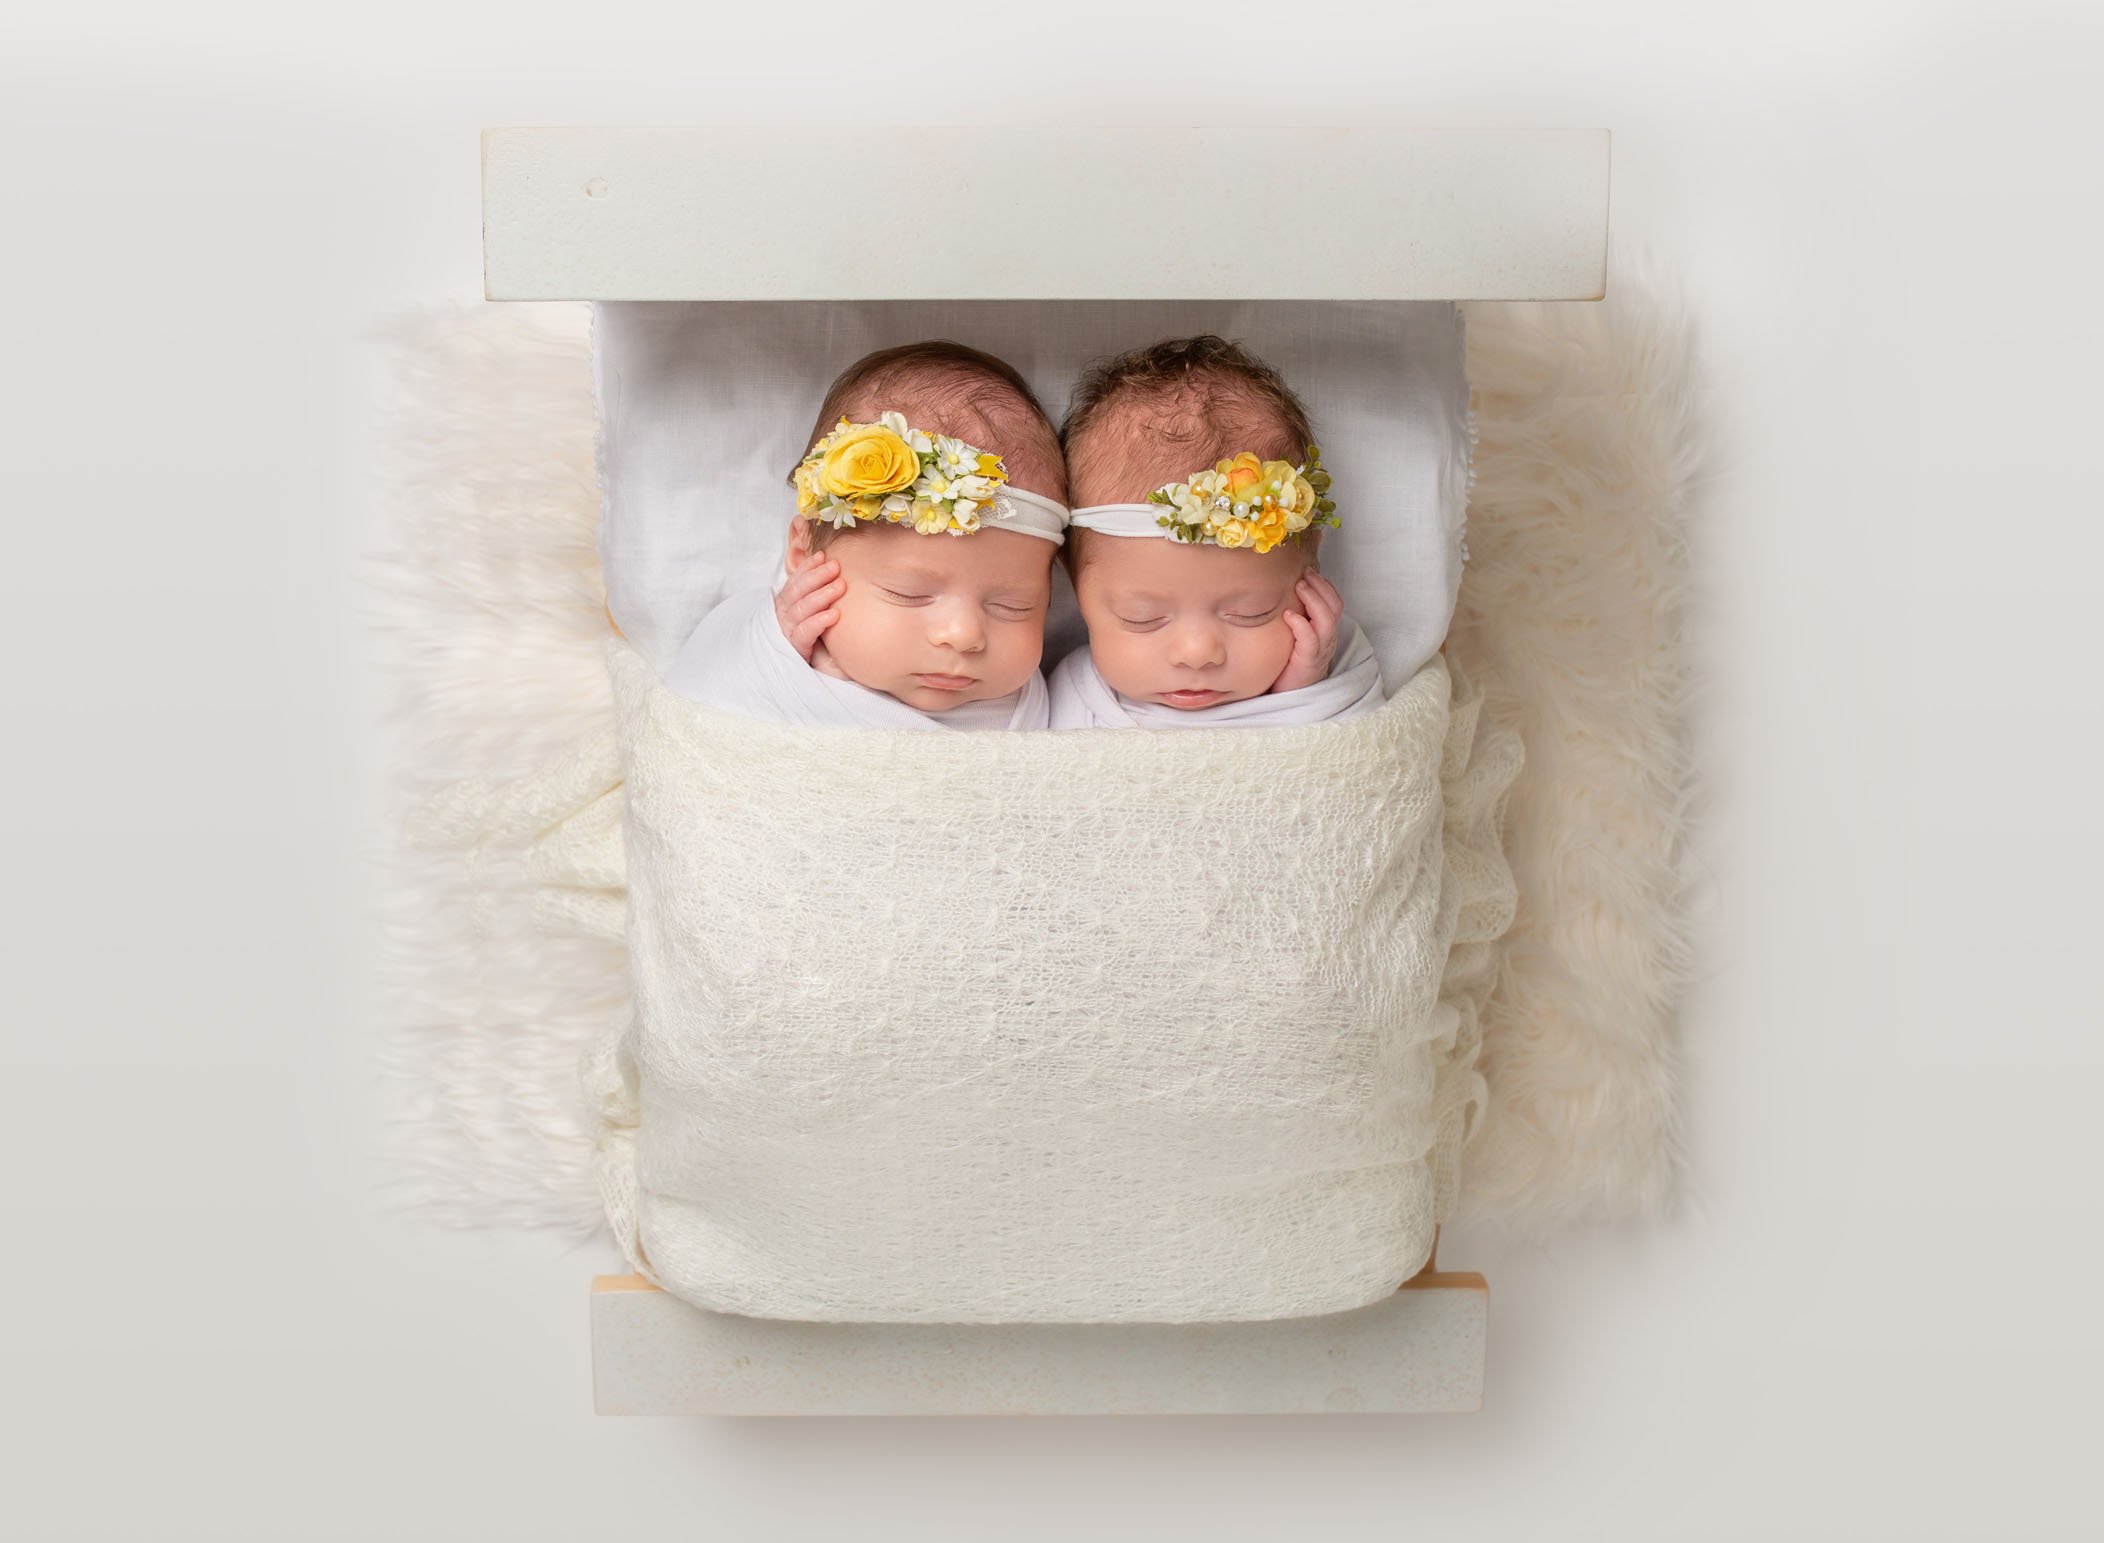 twin newborn baby girls asleep in tiny bed together with yellow floral headbands